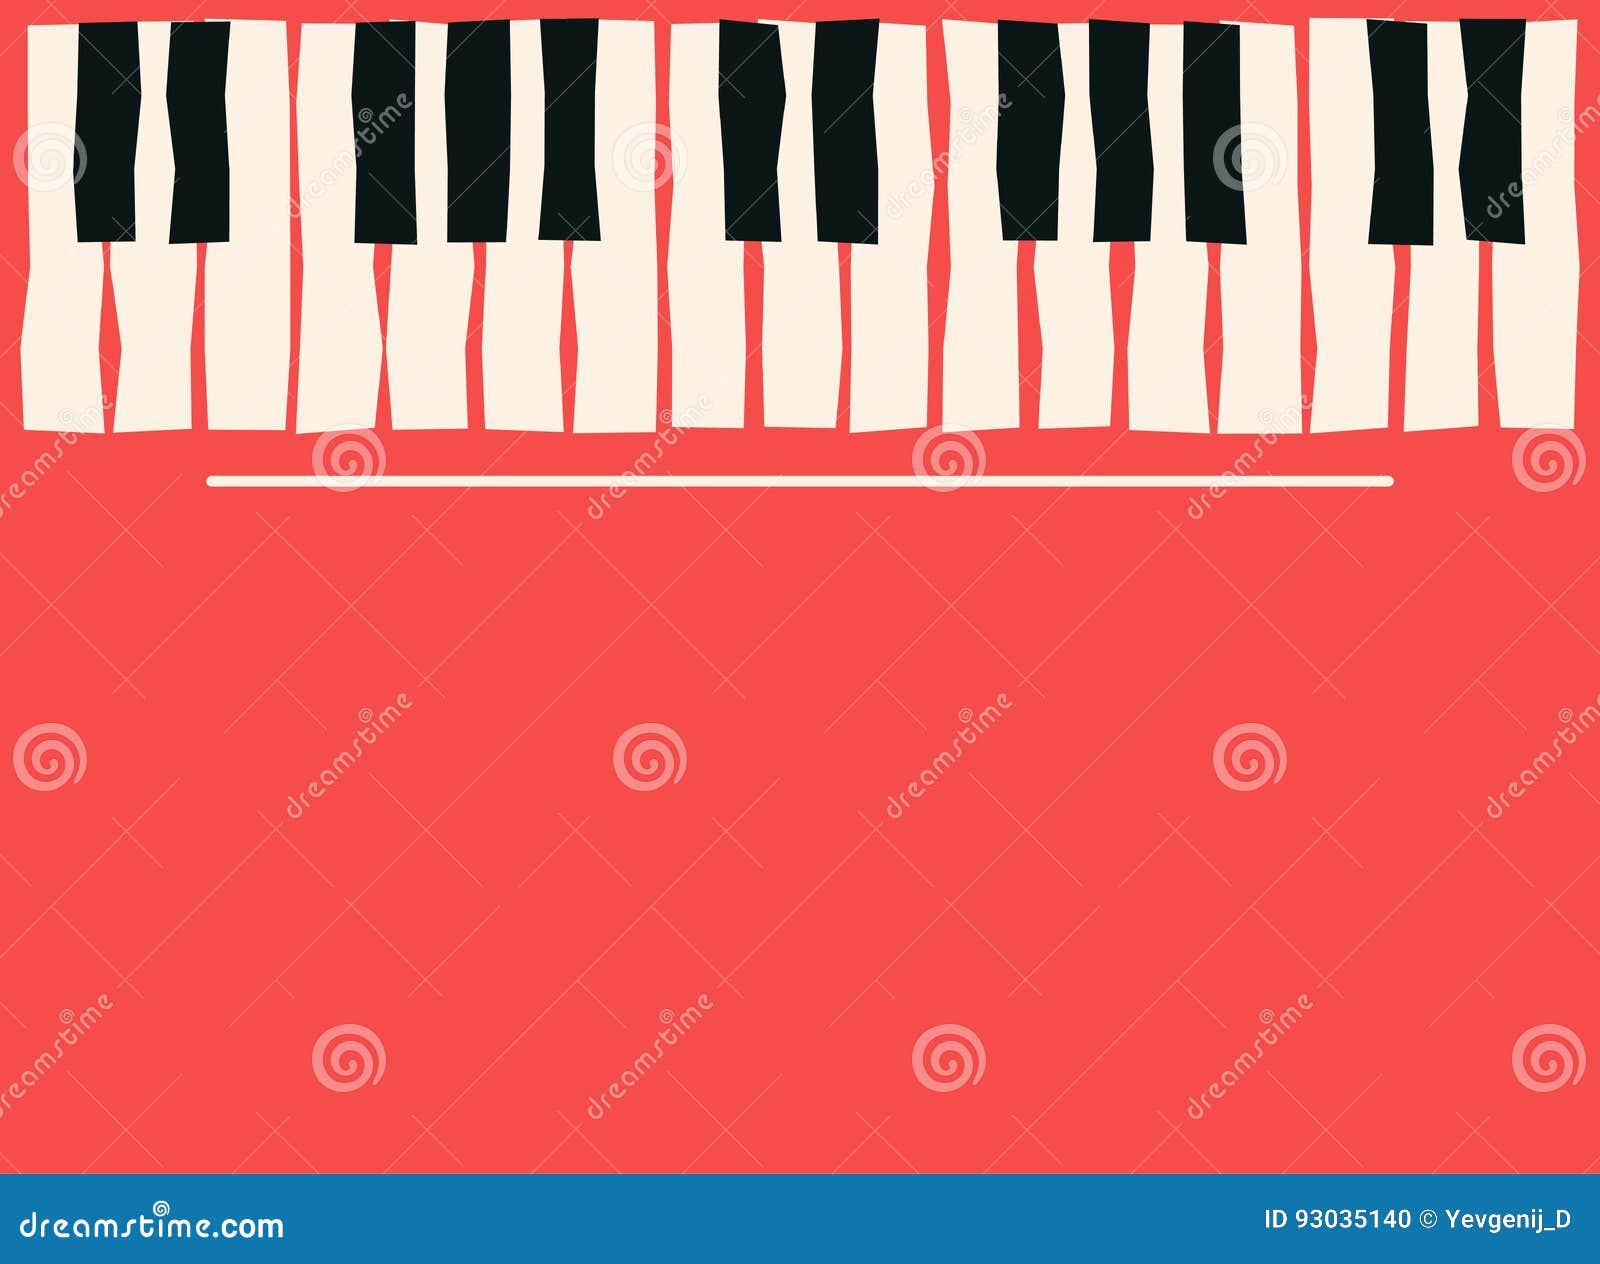 piano keys. music poster template. jazz and blues music concert background